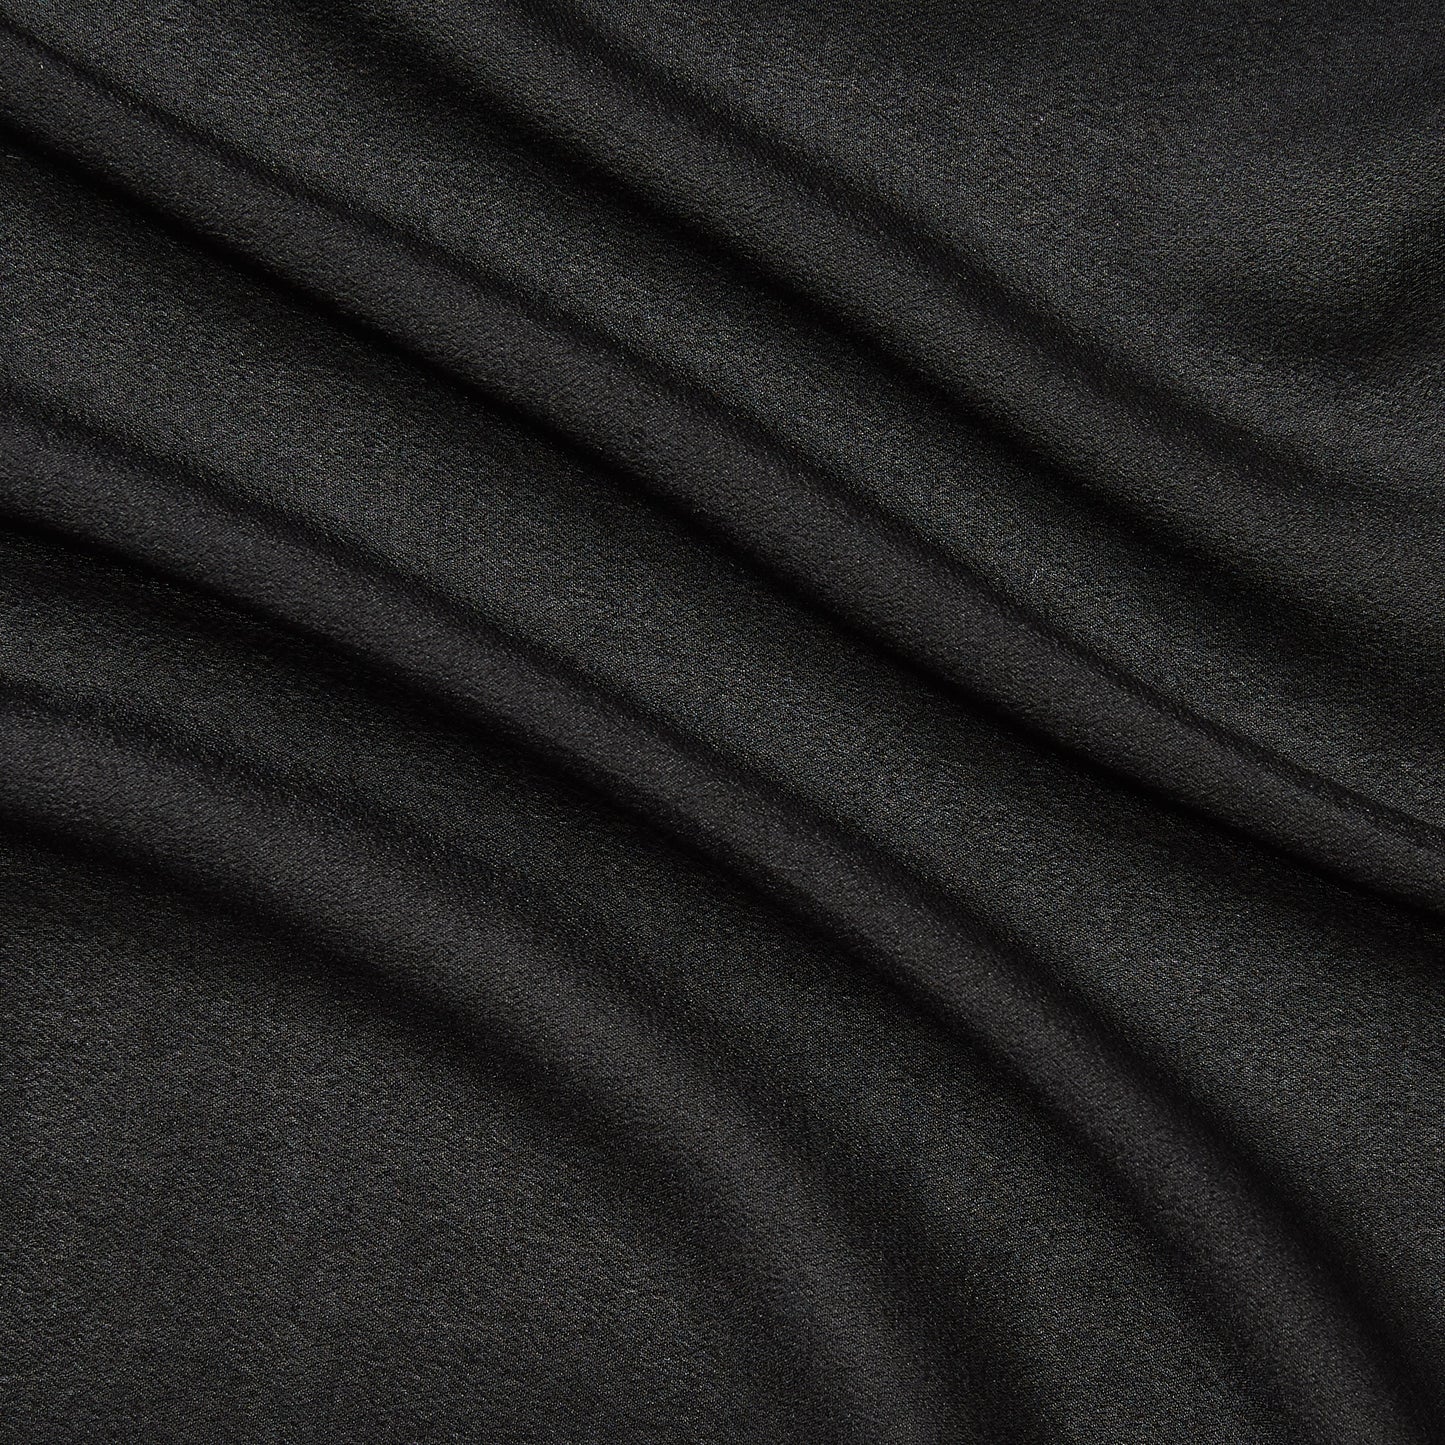 Featuring shimmer a black colored fabric with metallic glitter print on Semi-sheer, soft pure silk georgette featuring good drape